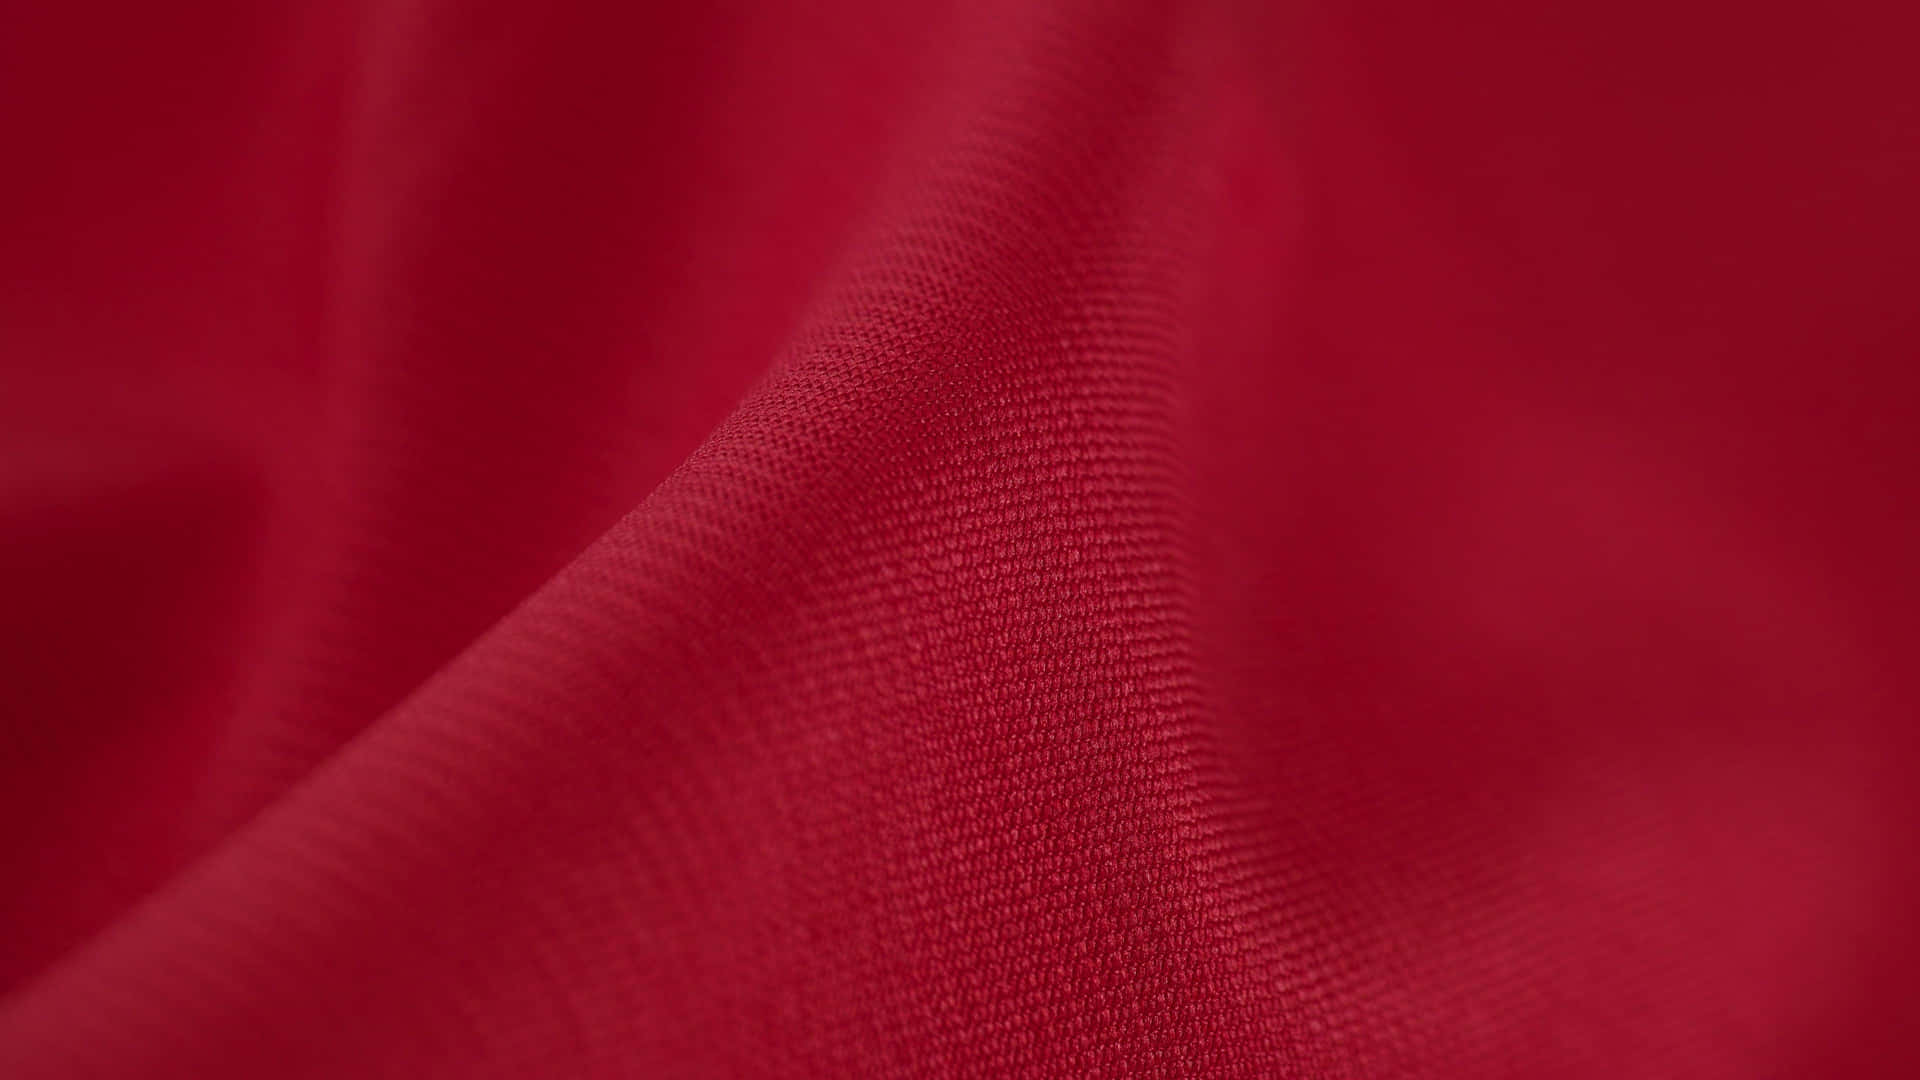 Red Fabric Texture And Folds Wallpaper